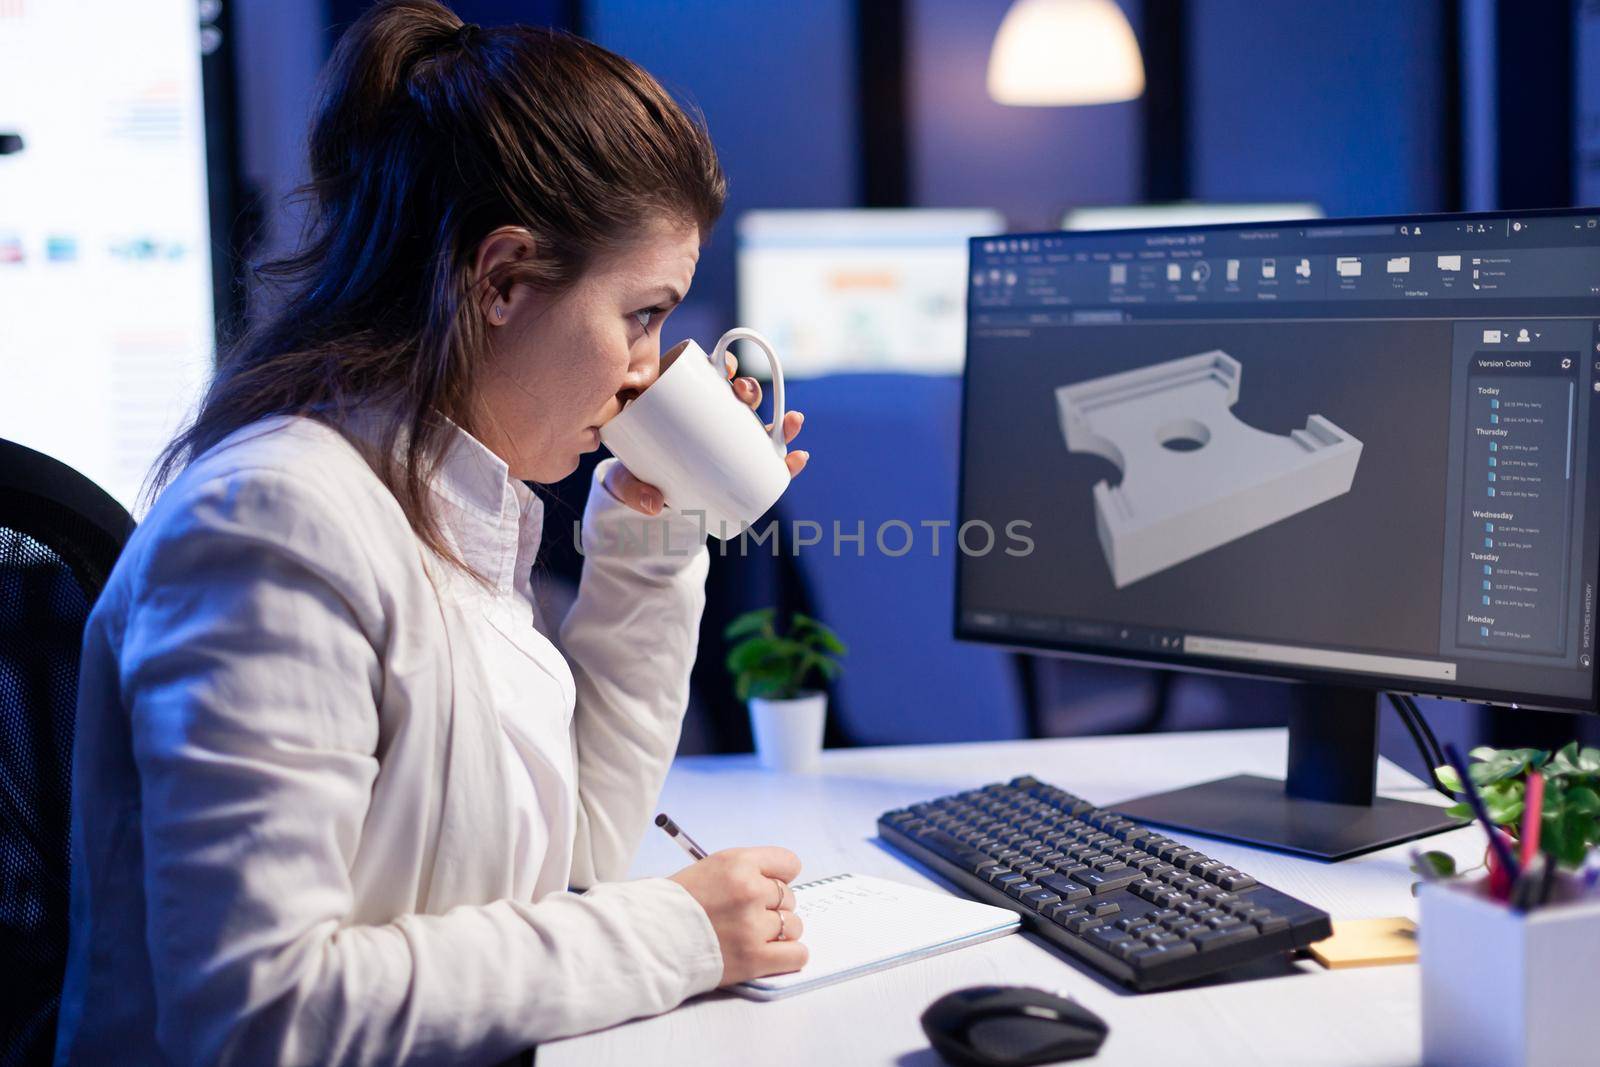 Software engineer working at digital cad project late at night in office company. Woman entrepreneur looking at technical construction before deadline using modern technology network